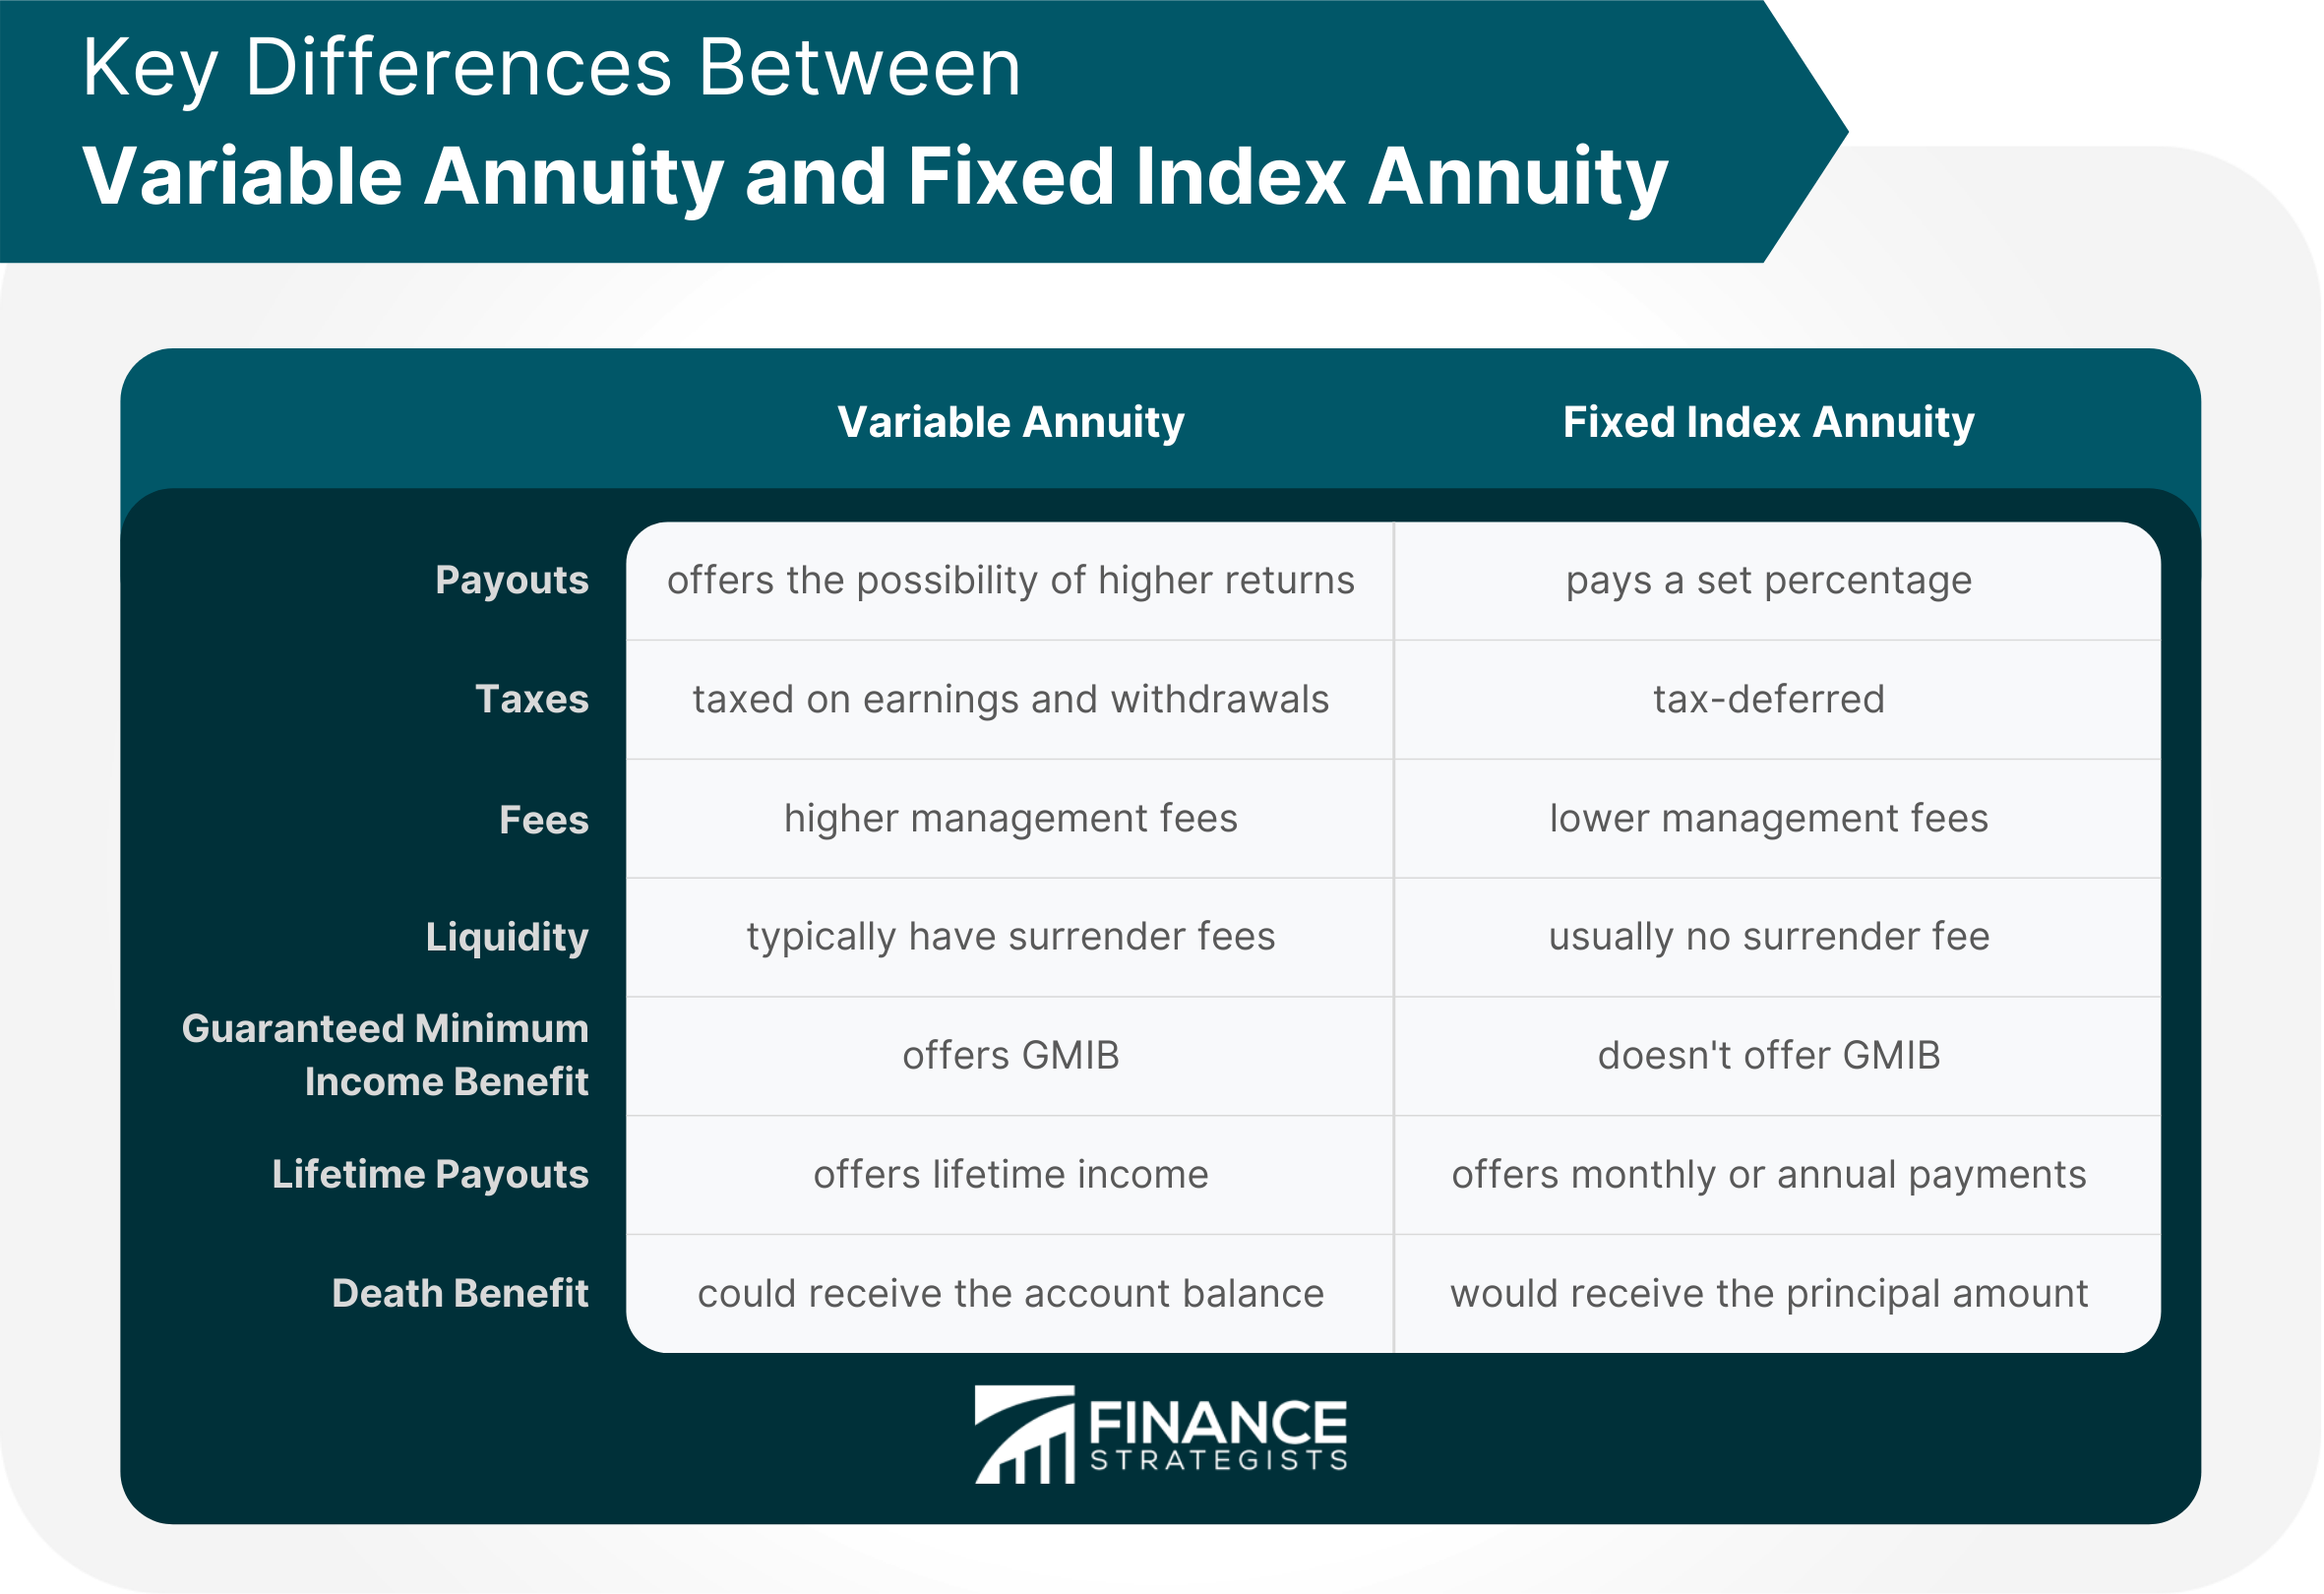 Key_Differences_Between_Variable_Annuity_and_Fixed_Index_Annuity